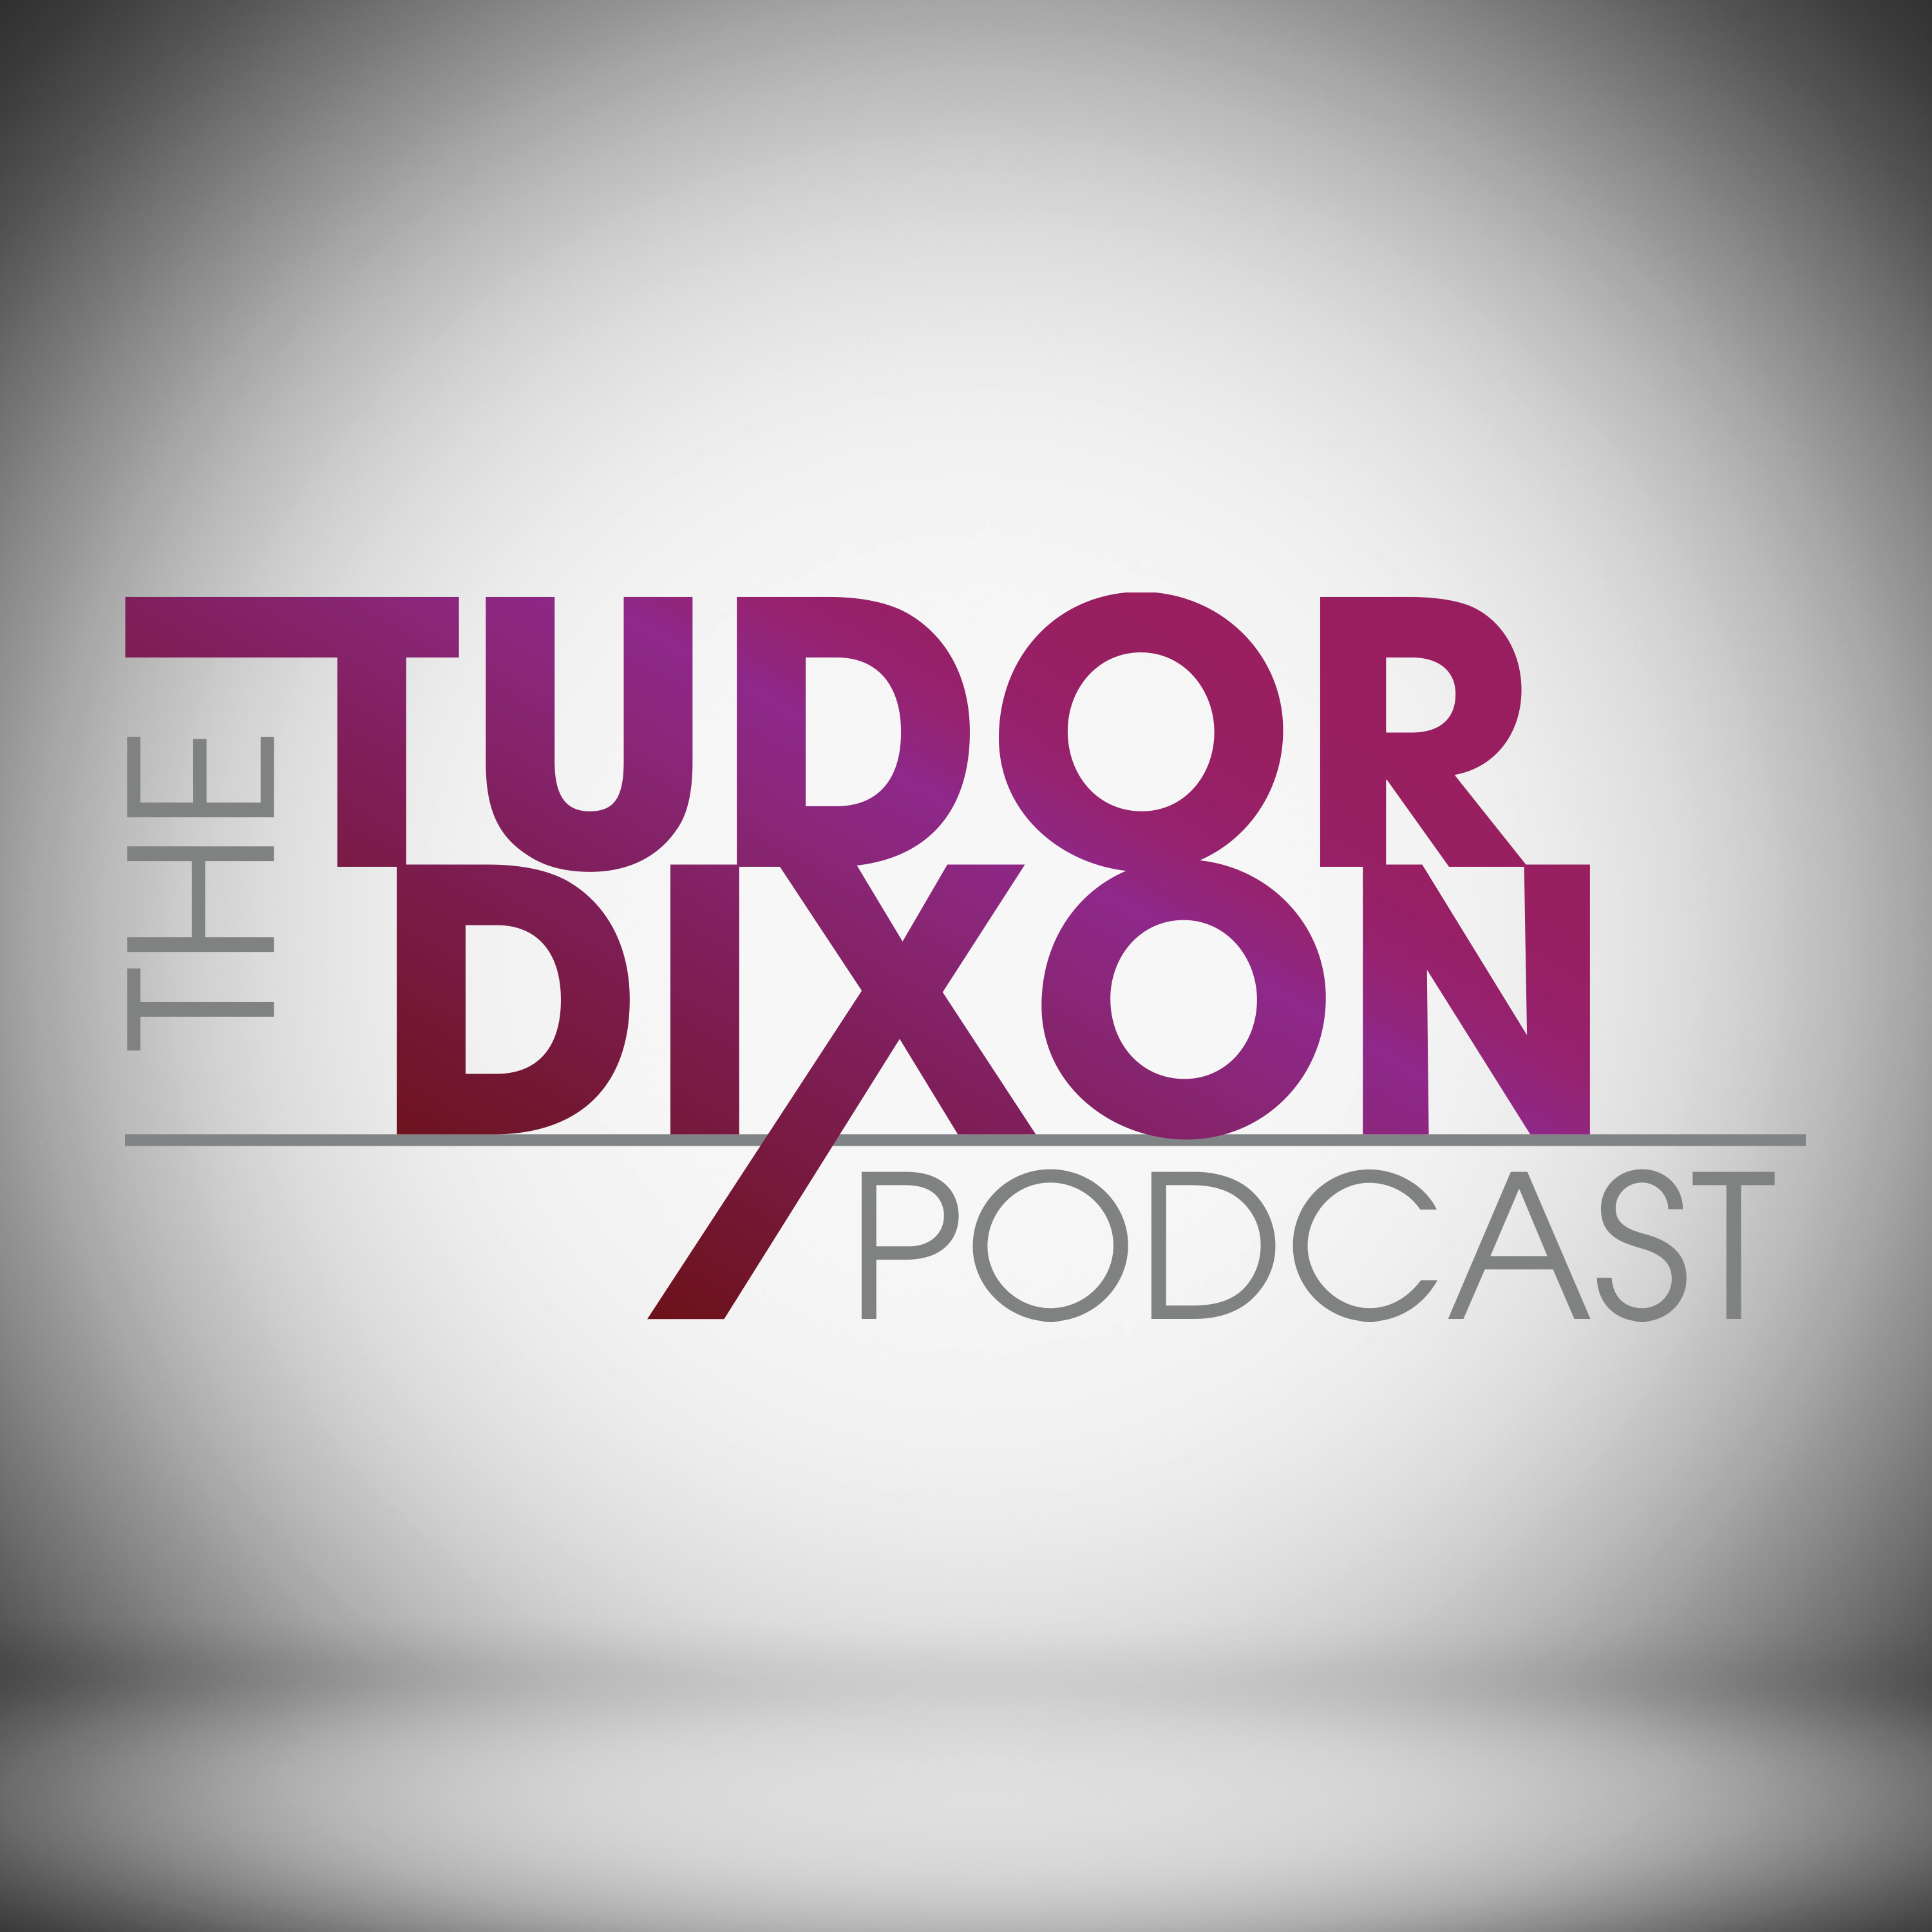 The Tudor Dixon Podcast: Navigating High School in the Age of Social Media with Ian Rowe